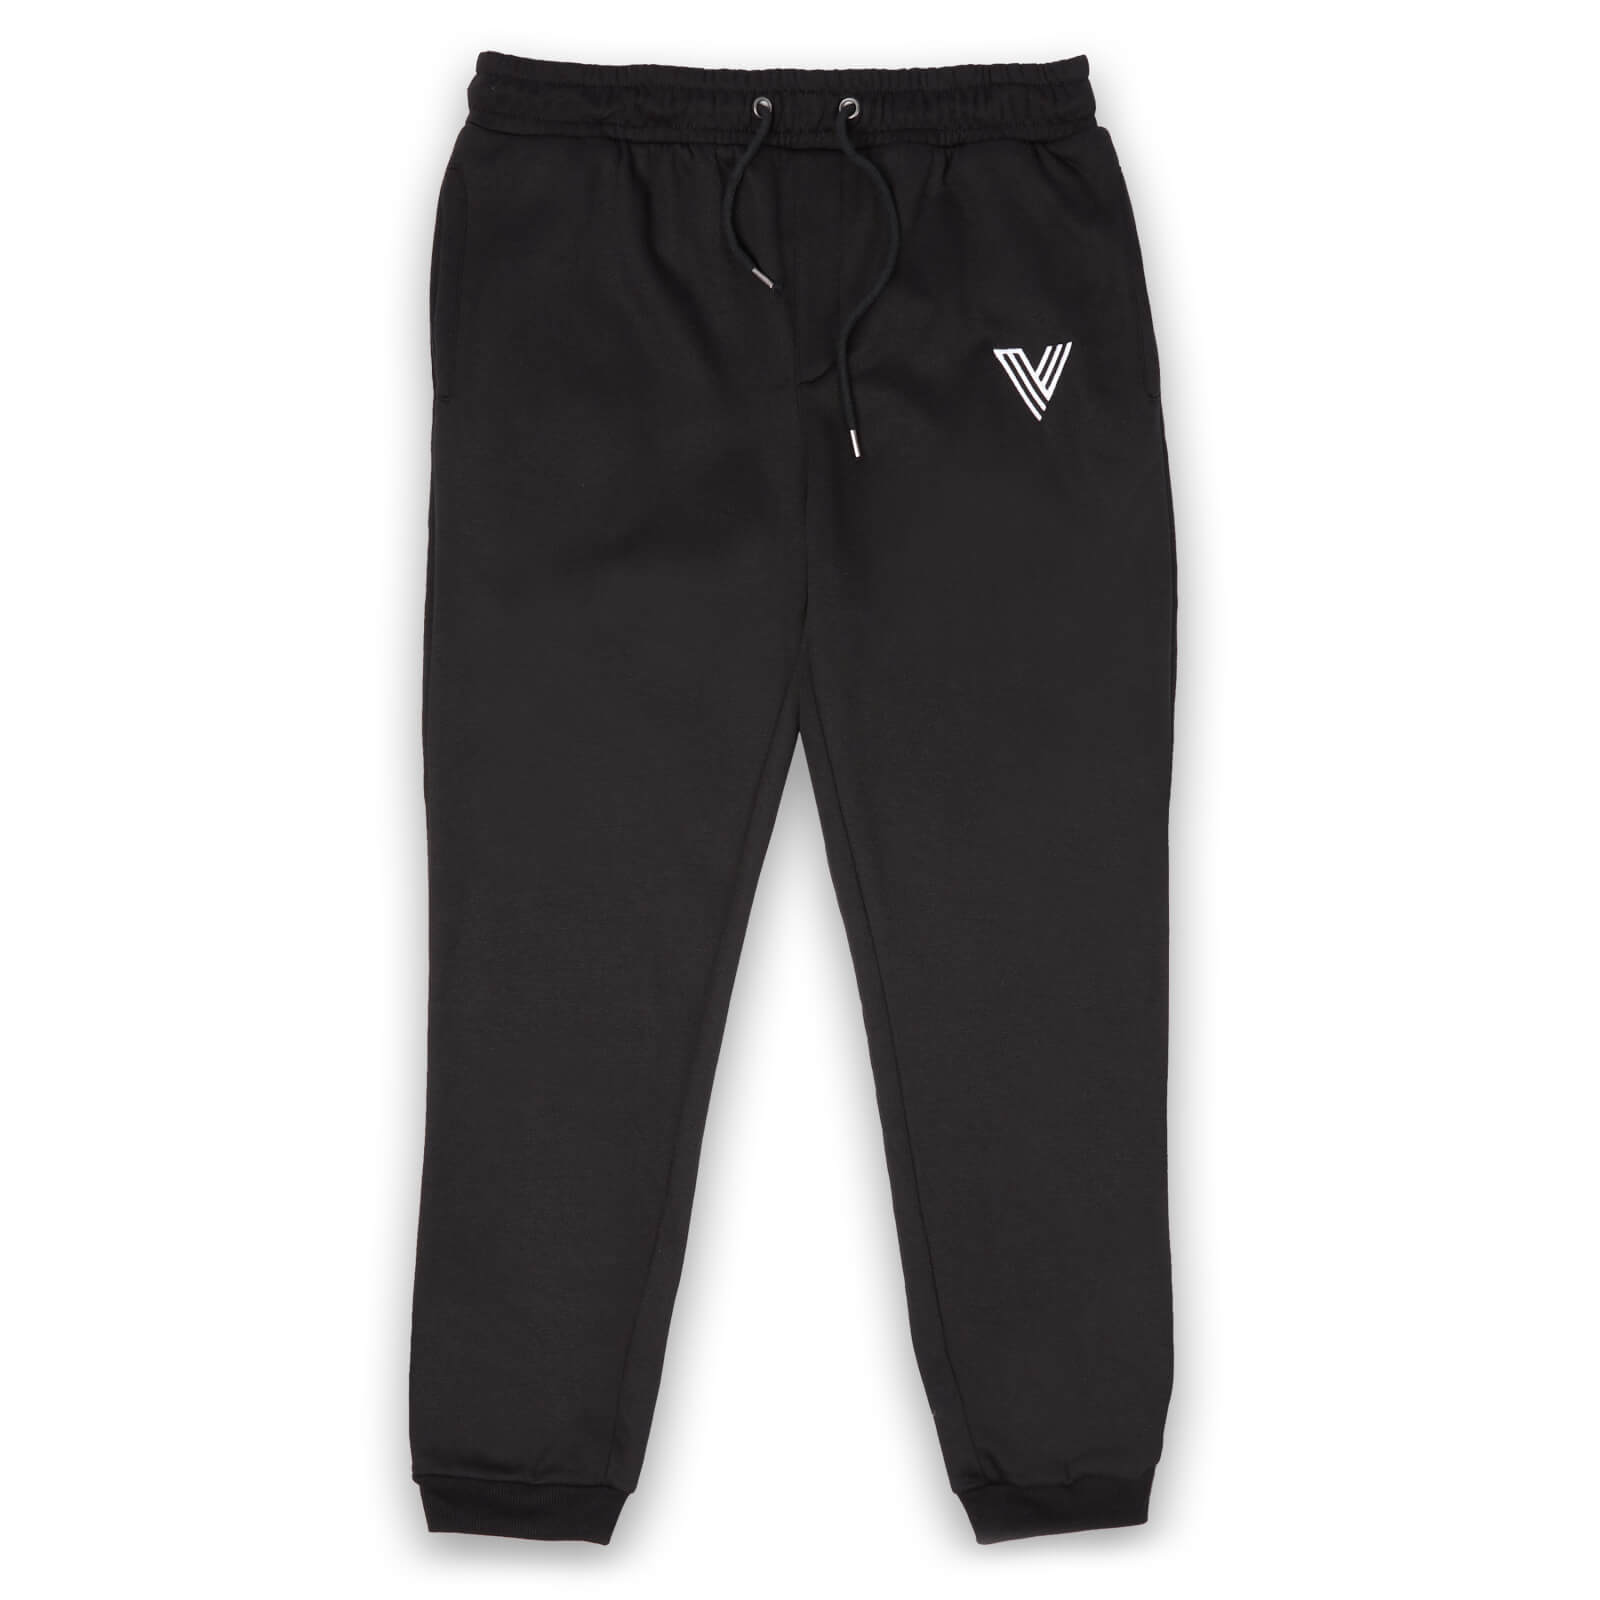 Call Of Duty V Embroidered Unisex Joggers - Black - S - Black